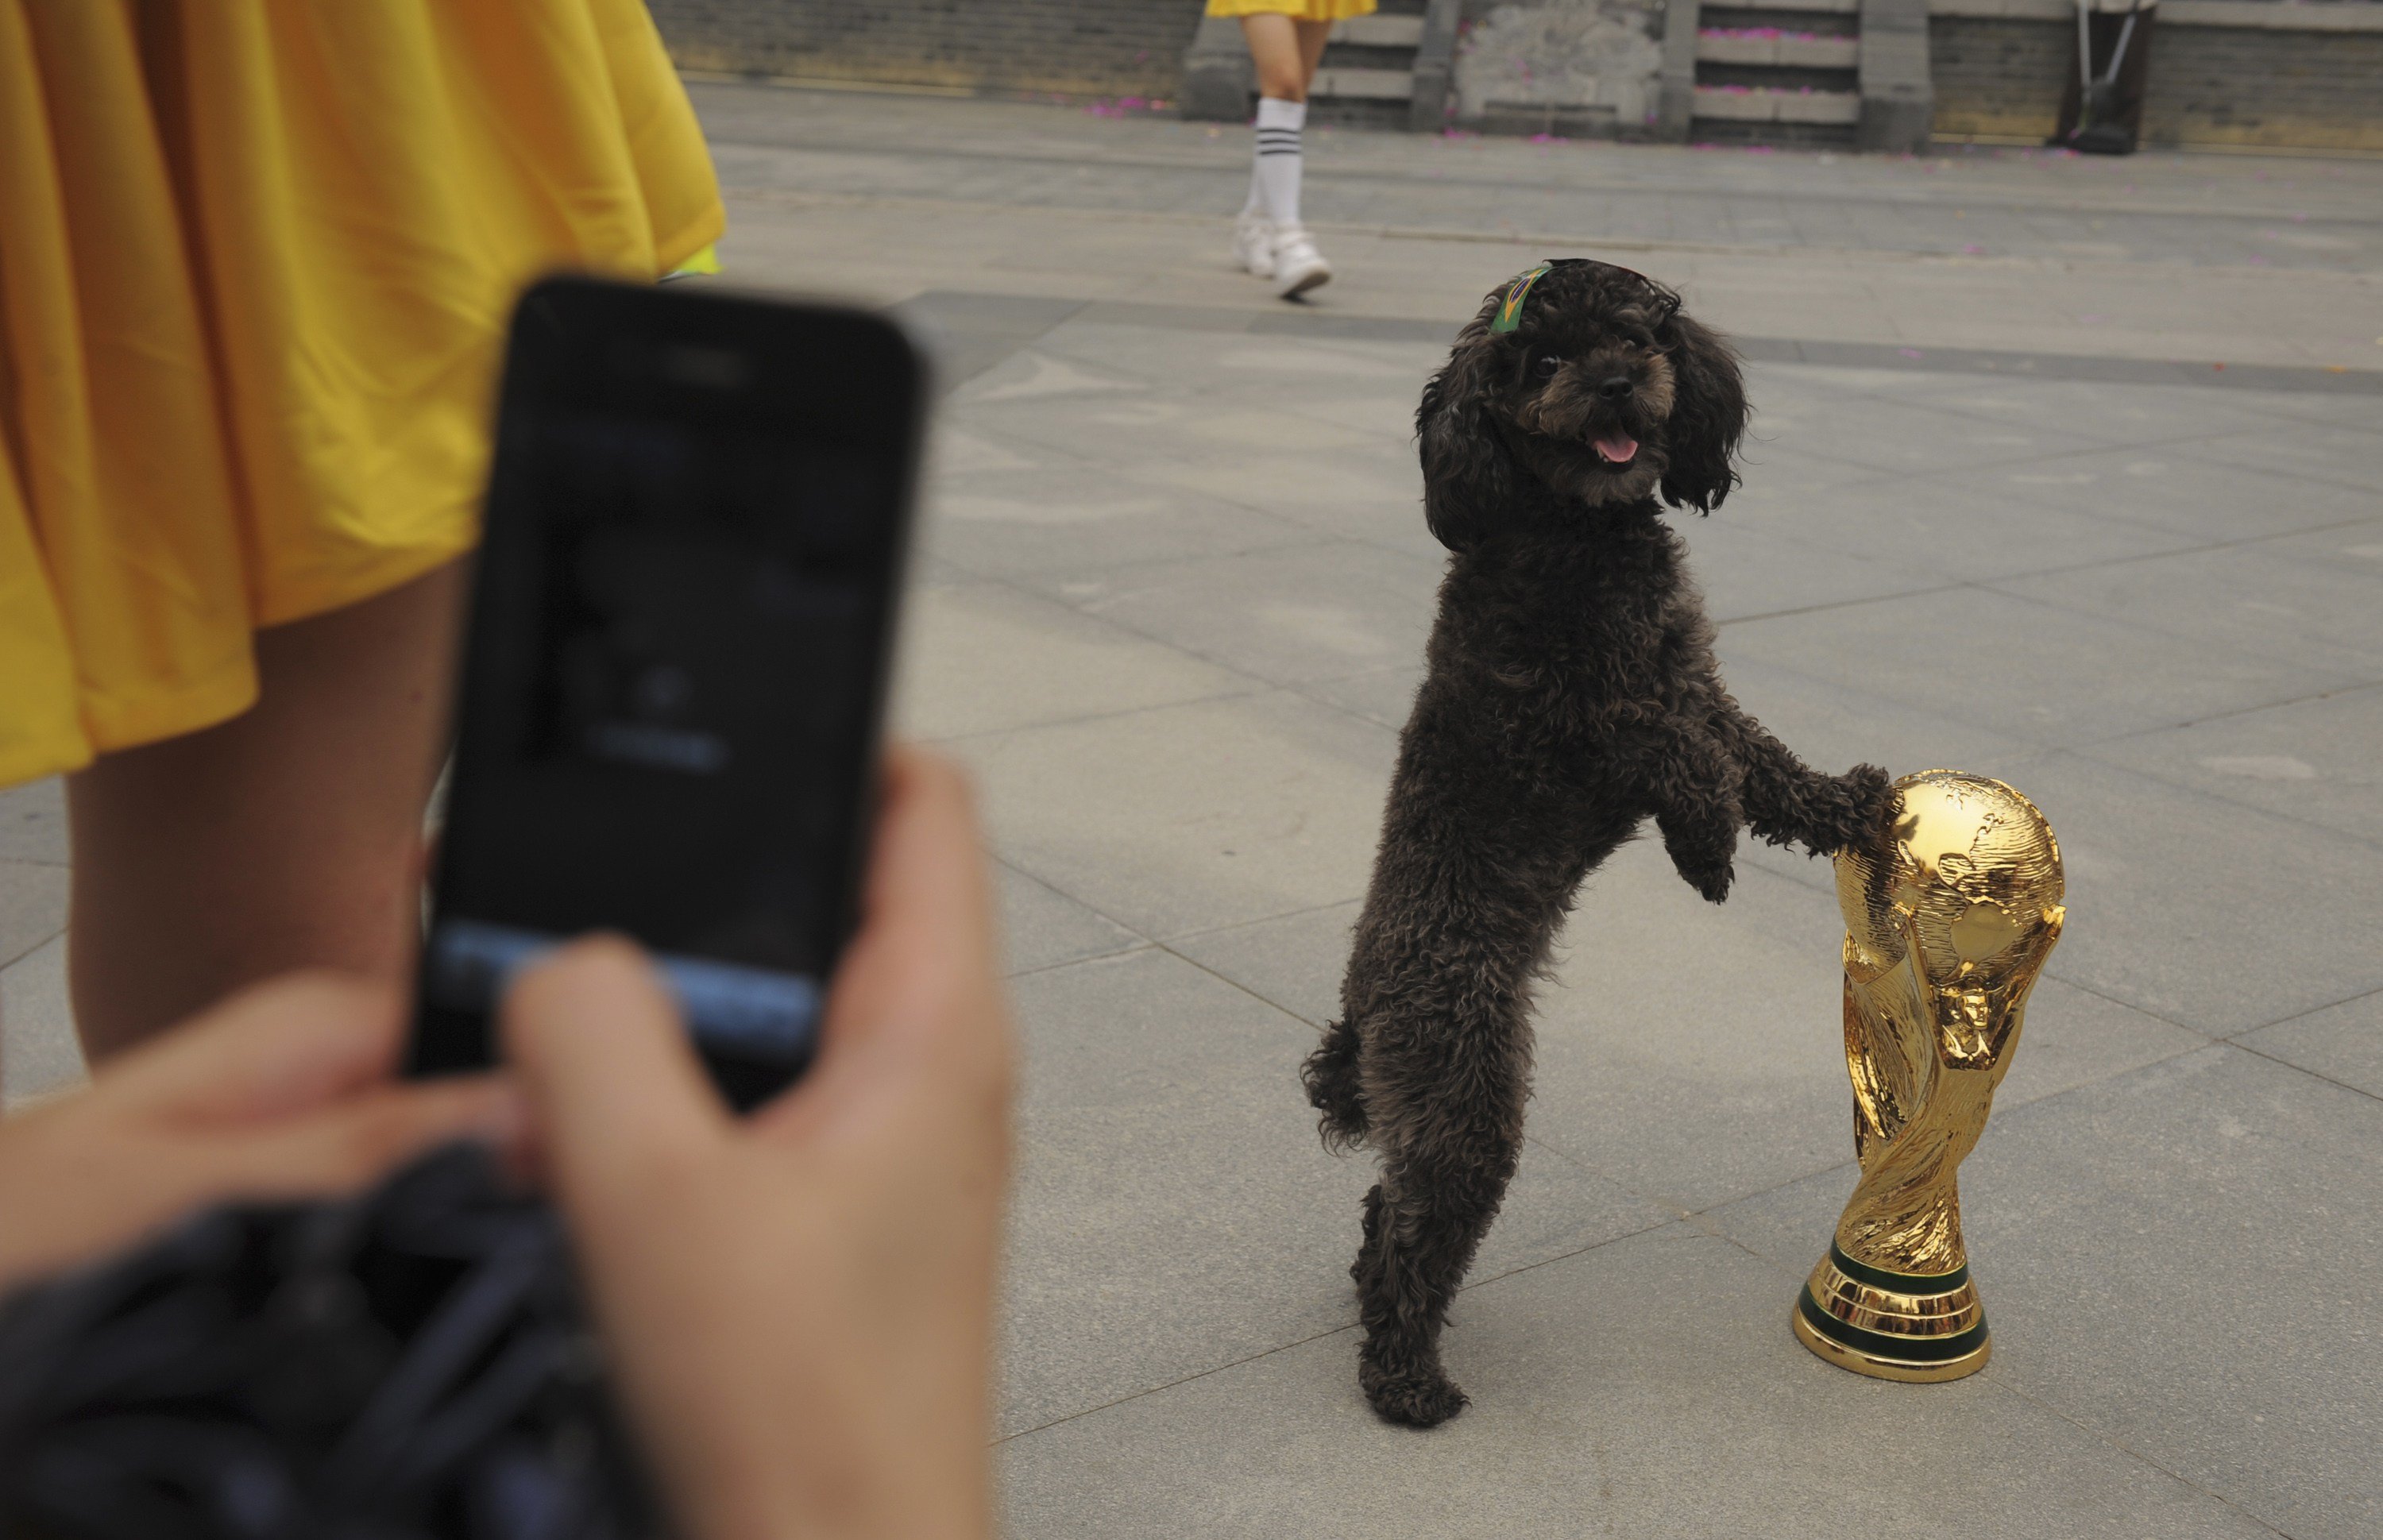 A dog with a Brazilian flag sticker on its head, touches a replica of the World Cup trophy as a visitor takes pictures during an event to celebrate the upcoming 2014 World Cup in Brazil, in Wuhan, China on June 12, 2014.